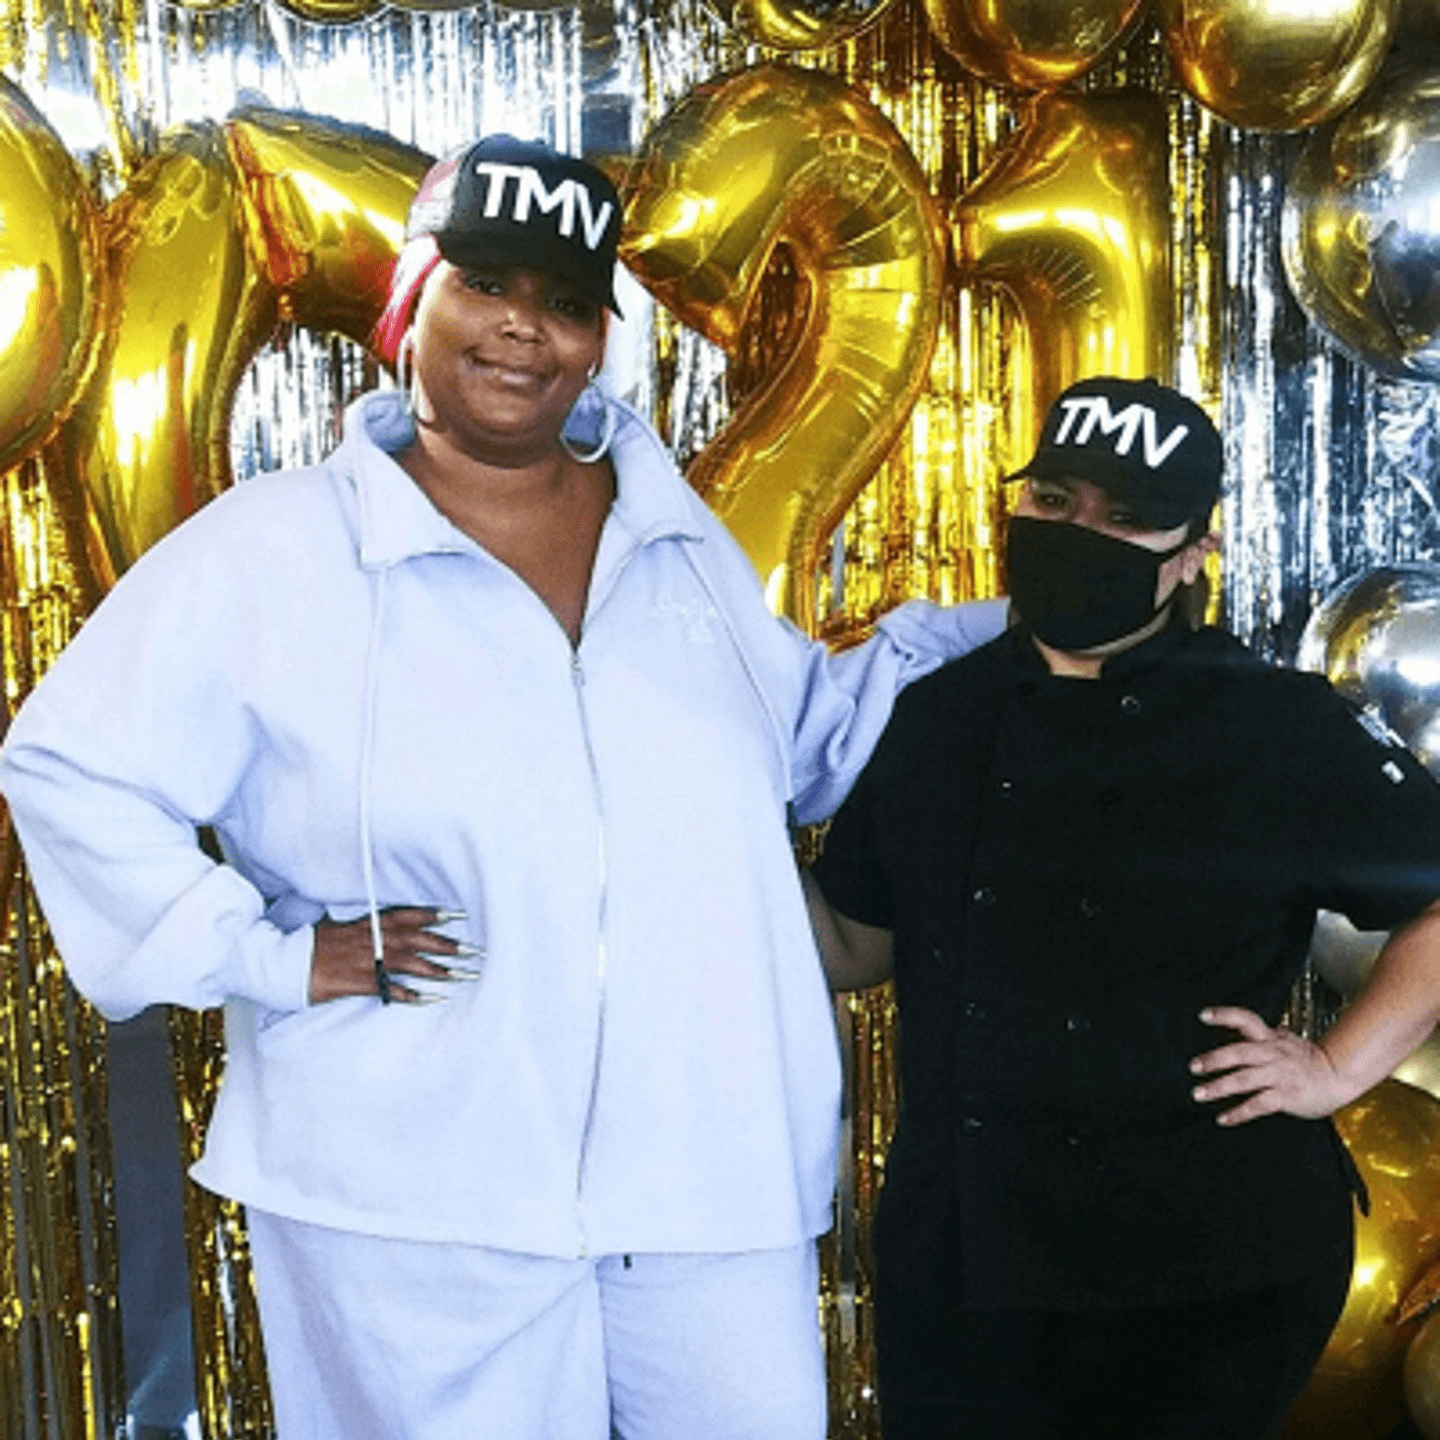 Lizzo Rings in New Year With Massive Vegan Feast